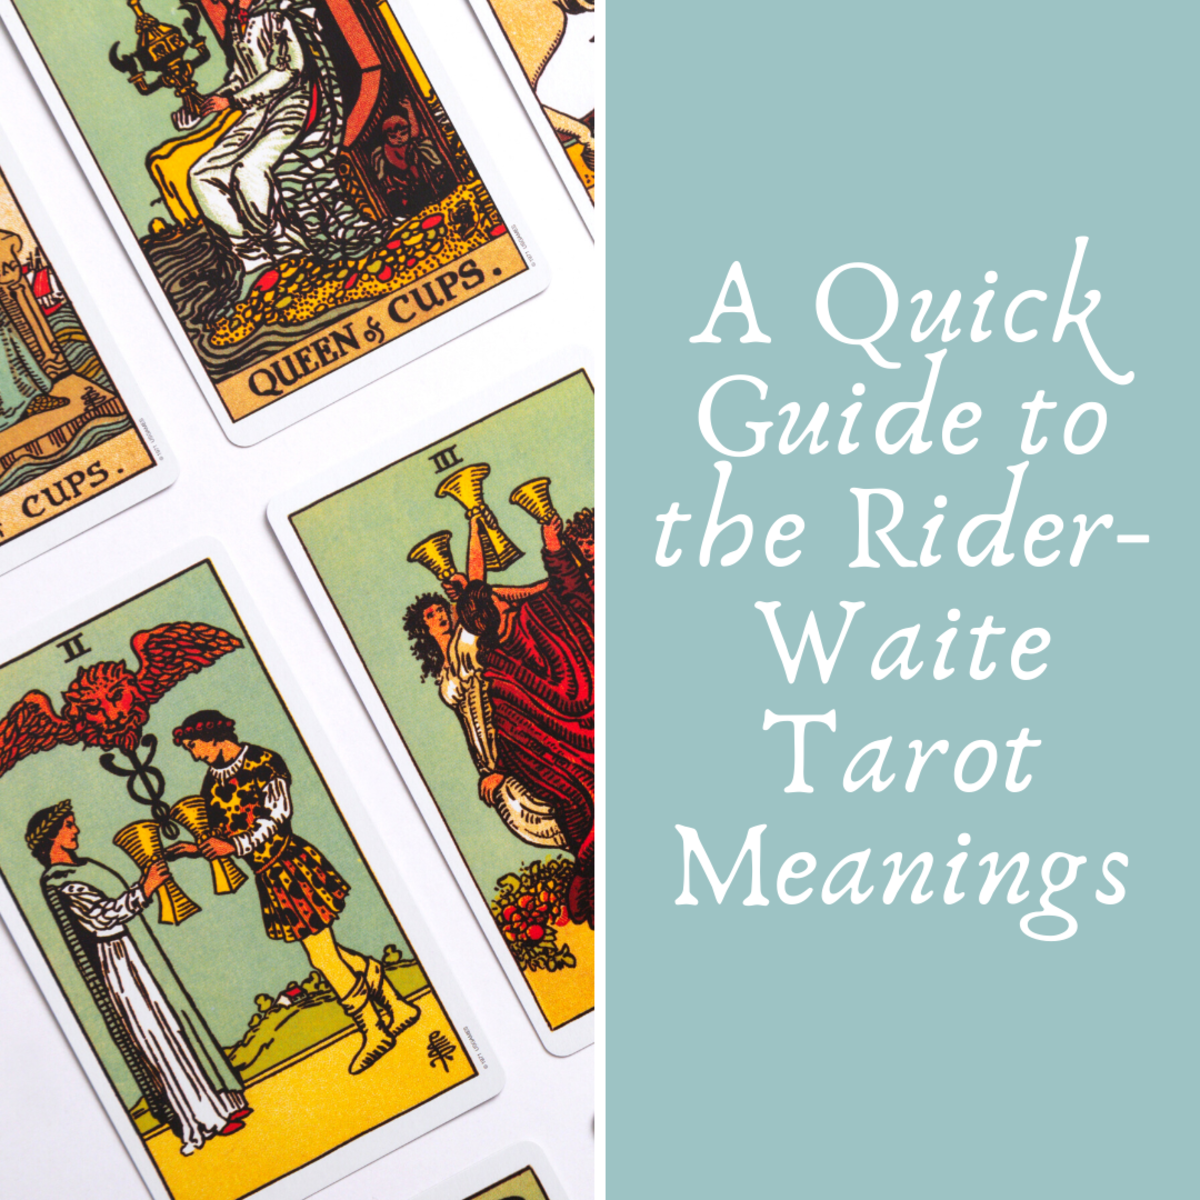 Read on for a quick reference to the Rider-Waite Tarot meanings! 